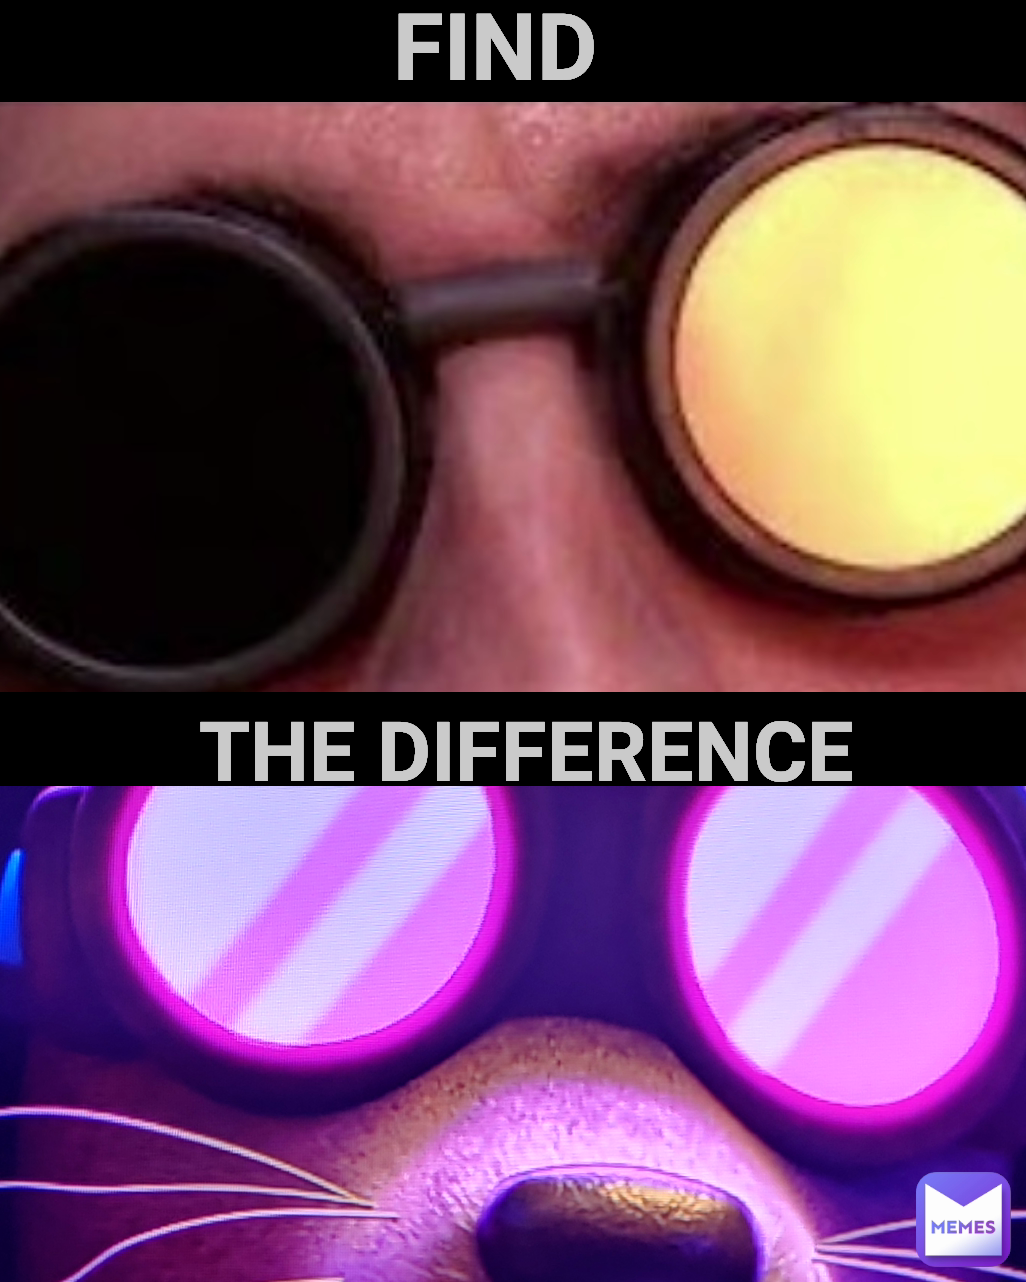 FIND THE DIFFERENCE